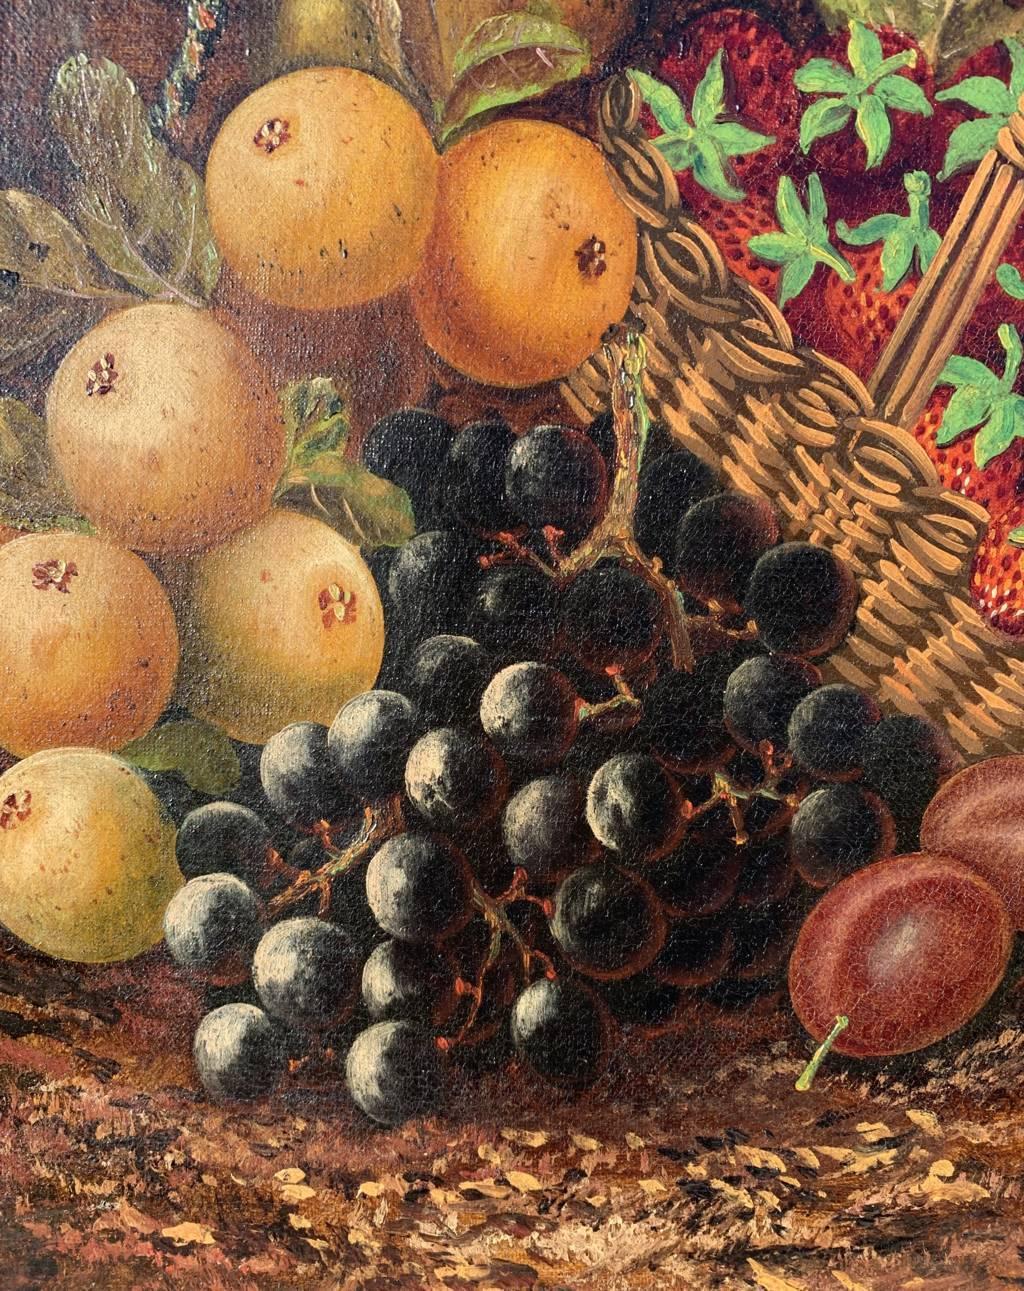 J. Clays (British, 19th-20th century) - Still life with fruit basket.

61 x 51 cm without frame, 67.5 x 58 cm with frame.

Antique oil painting on canvas, in a gilded wooden frame.

Condition report: Original canvas. Good condition of the pictorial